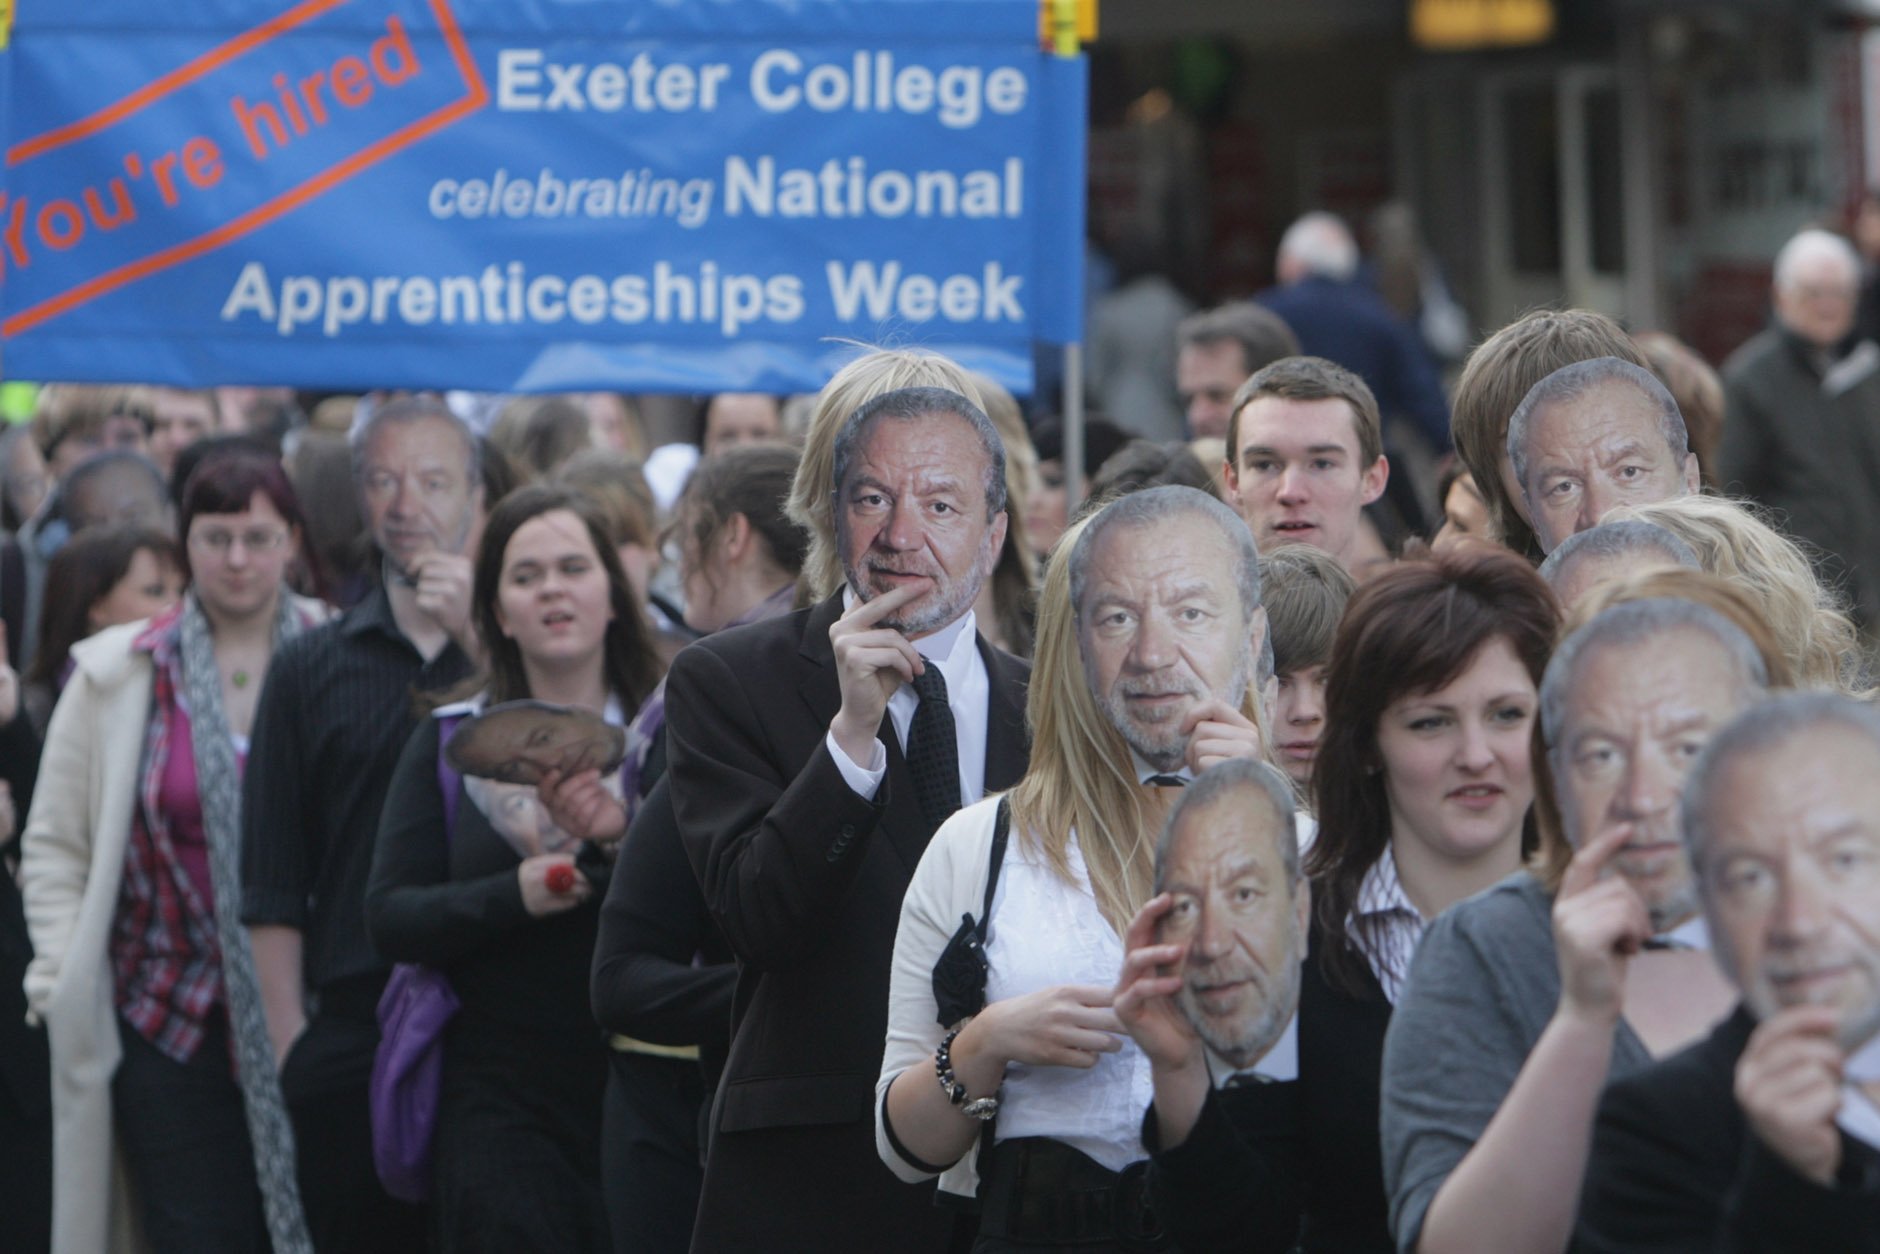 Students wearing Sir Alan Sugar masks at the launch of a campaign to boost the take-up of apprenticeships in the UK. Yet despite a series of reforms, the scheme has proved costly and inefficient. Photo: Matt Cardy/Getty Images.